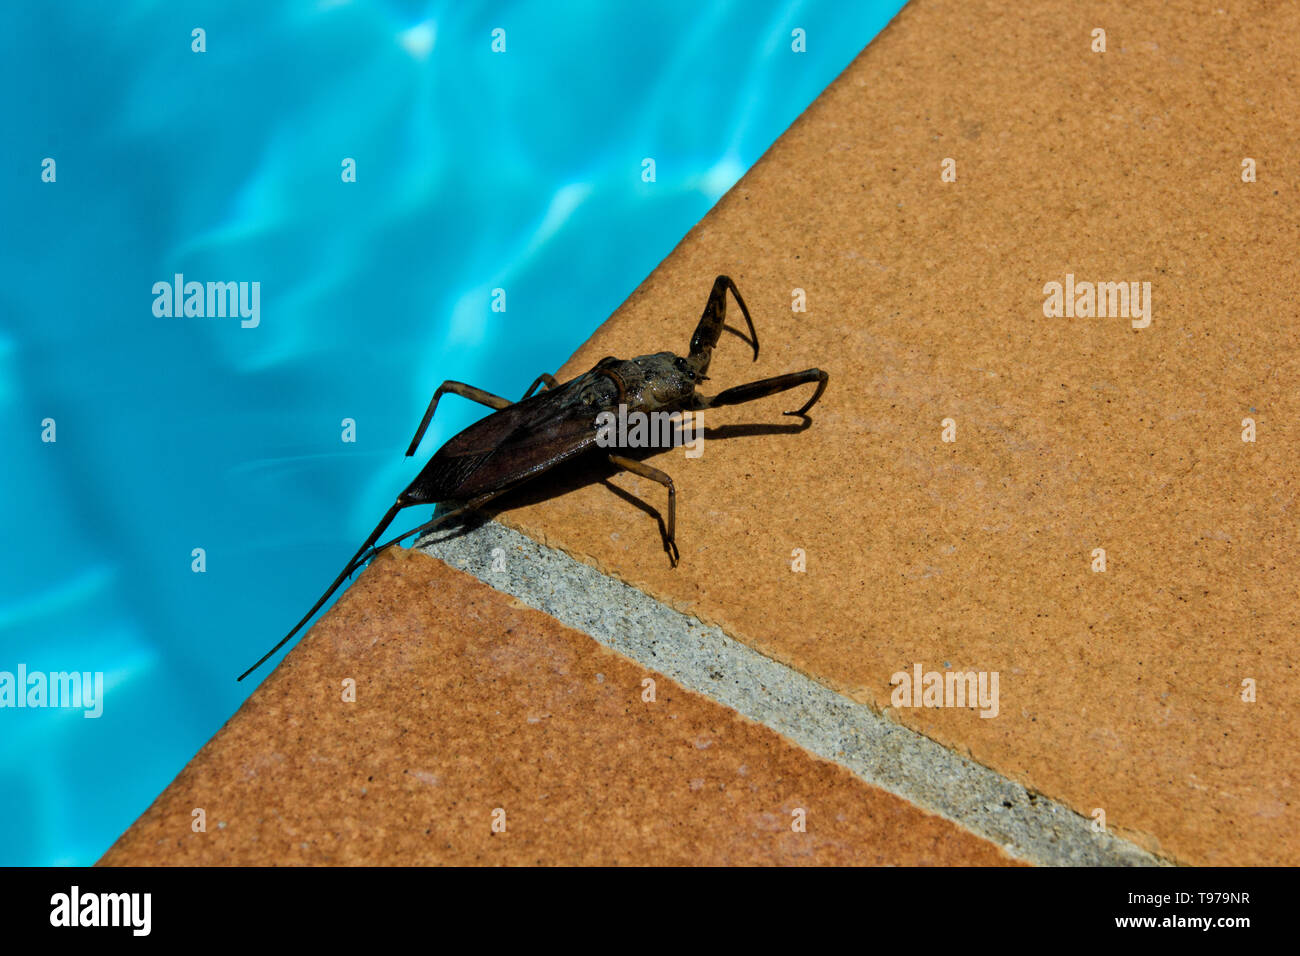 Cockroach on the edge of swimming pool; close up Stock Photo